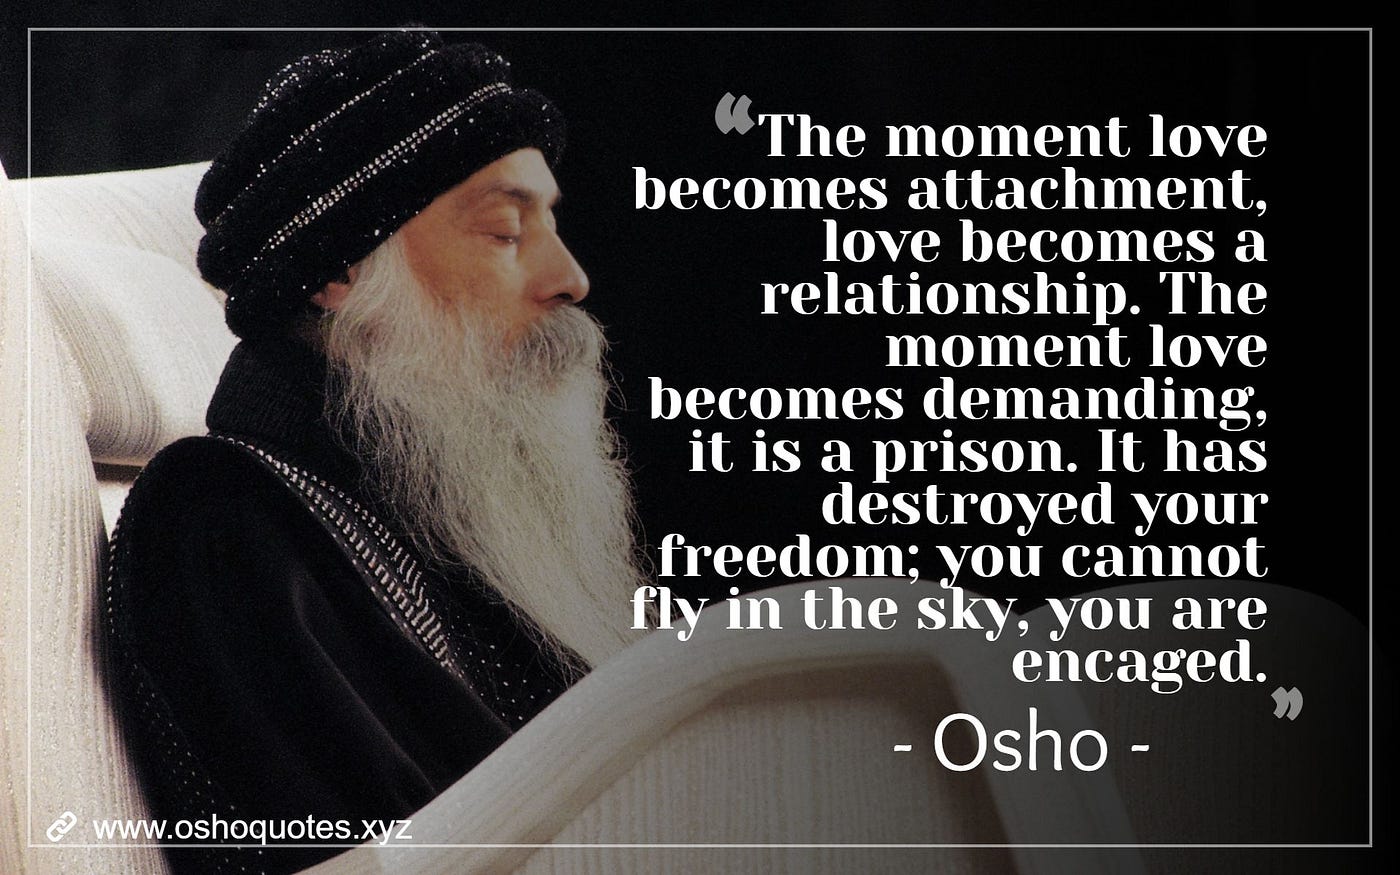 Best 21 Osho Quotes on Life that inspire. | Medium